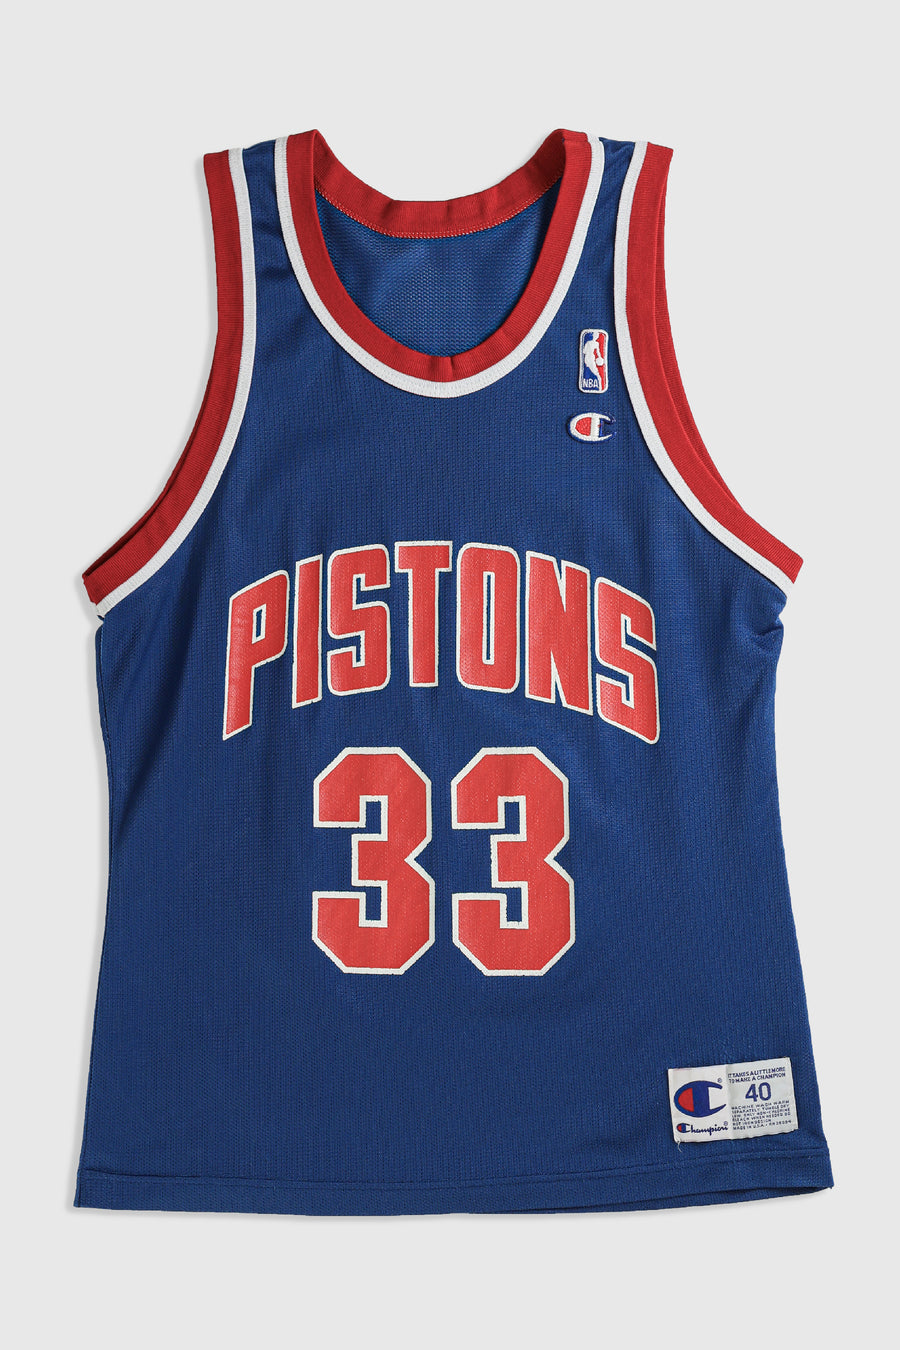 throwback pistons jersey